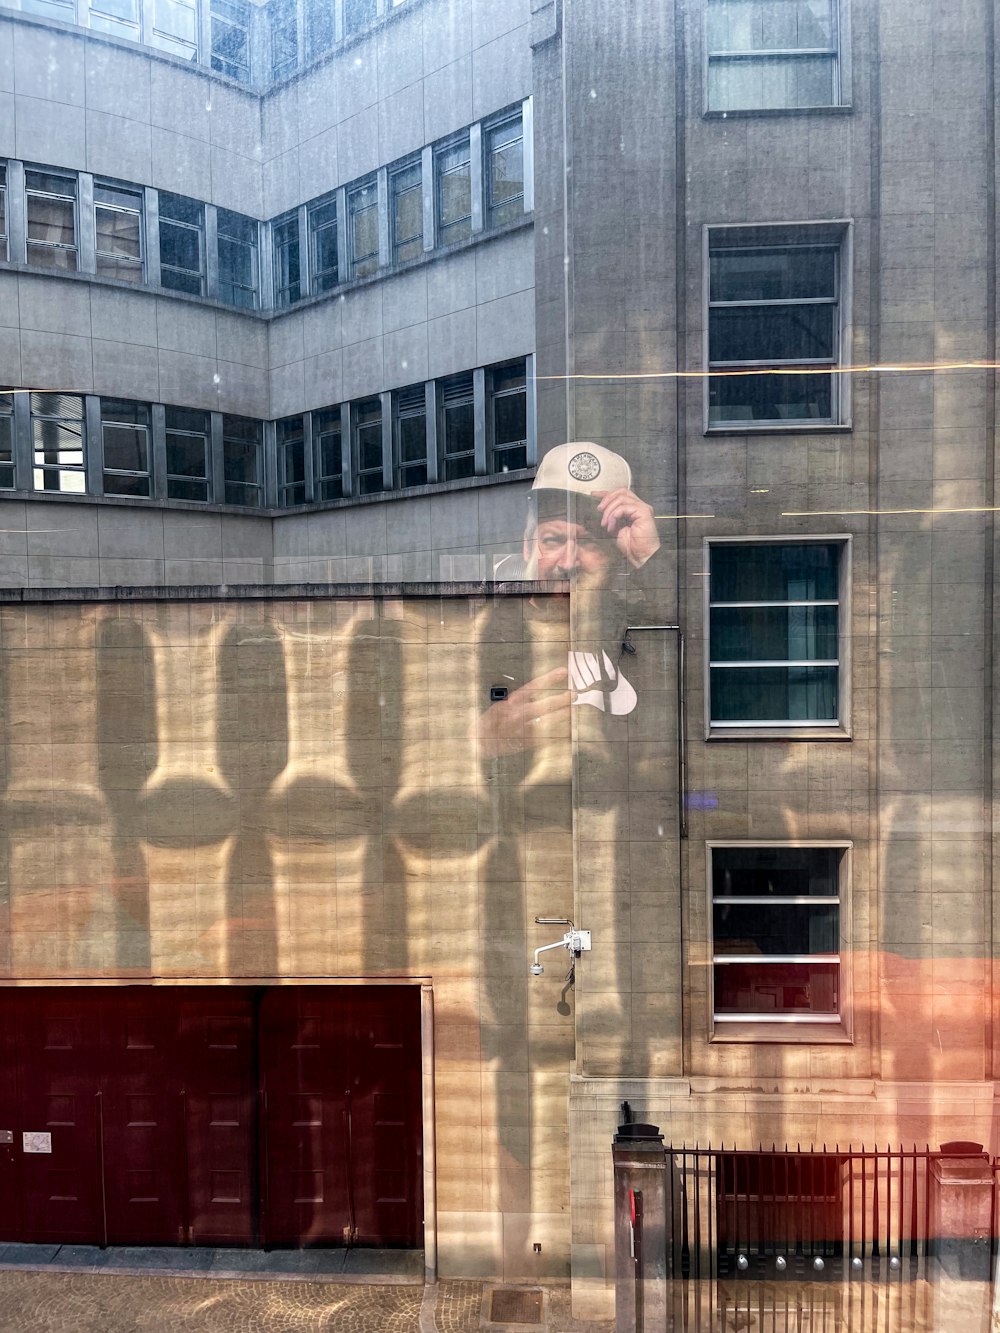 a reflection of a man in a window of a building